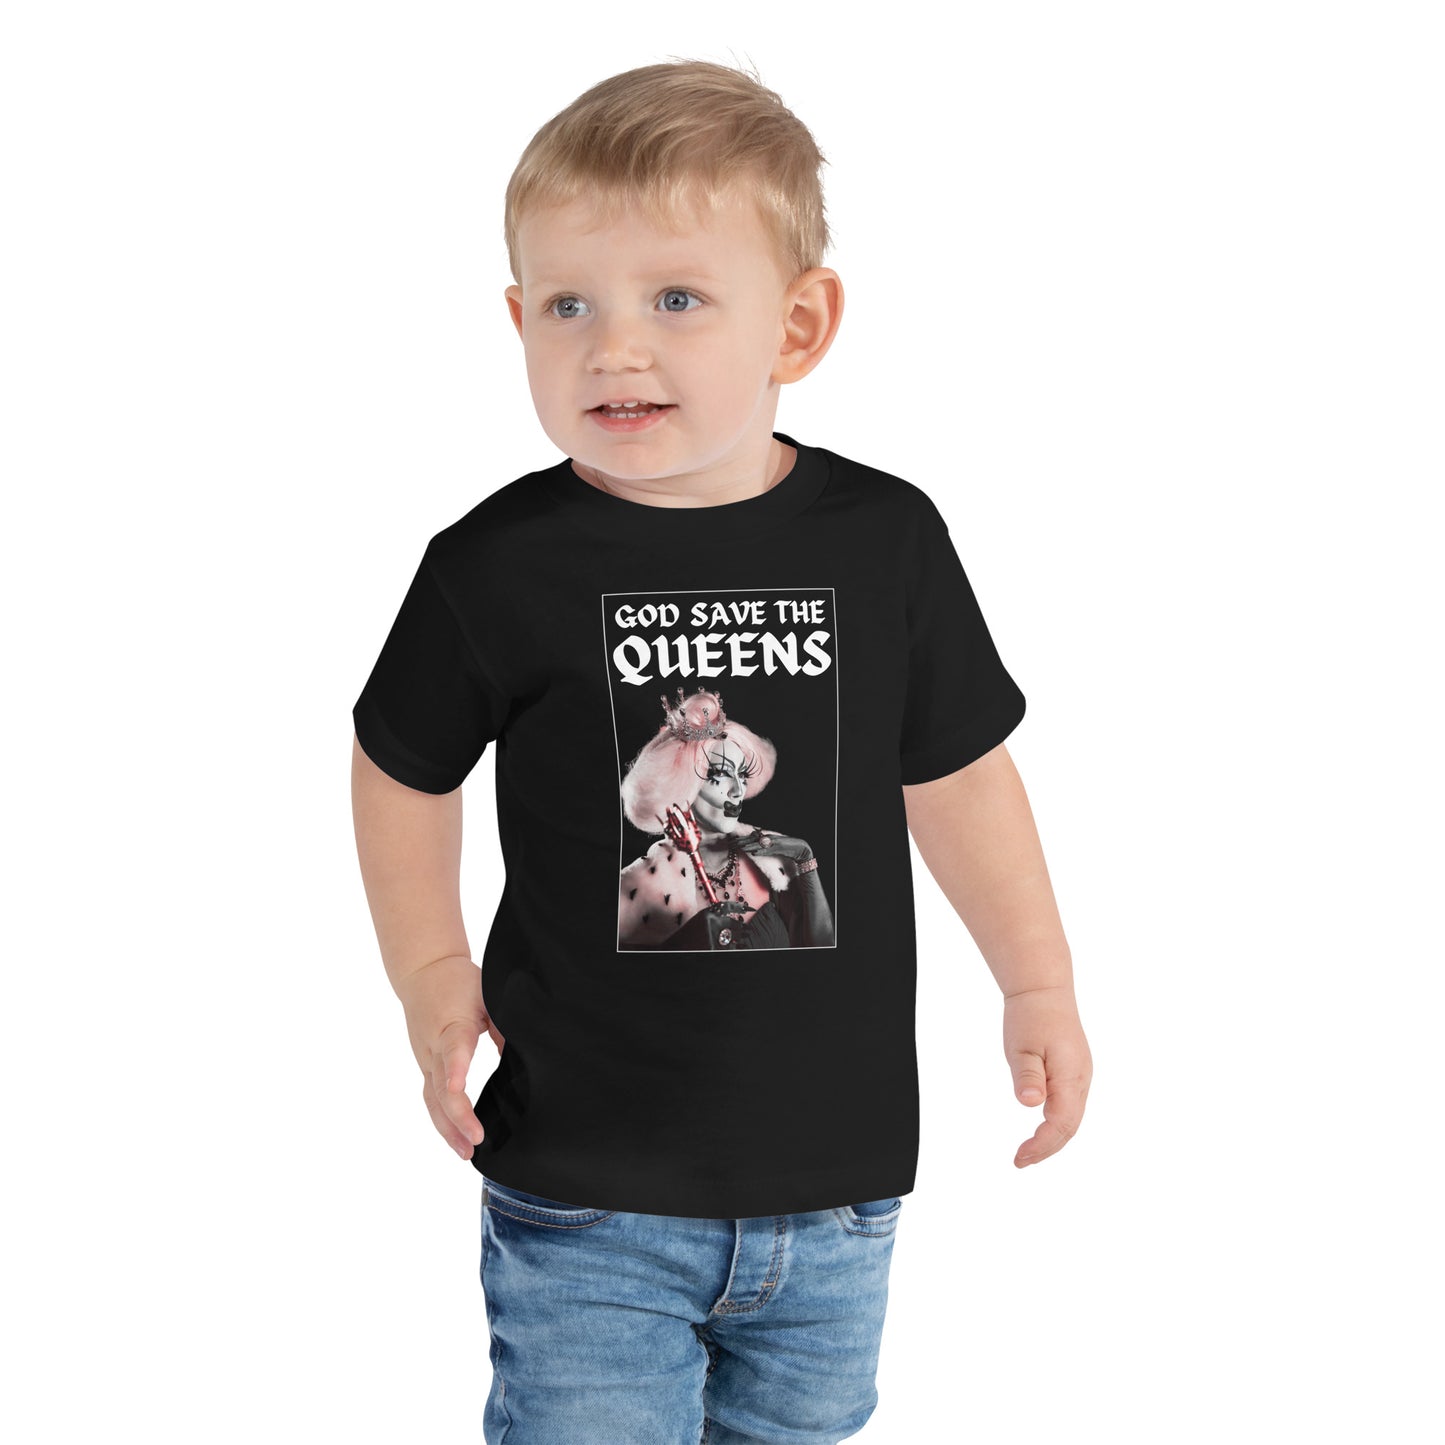 God Save the Queens Toddler Tee - Dark Colors